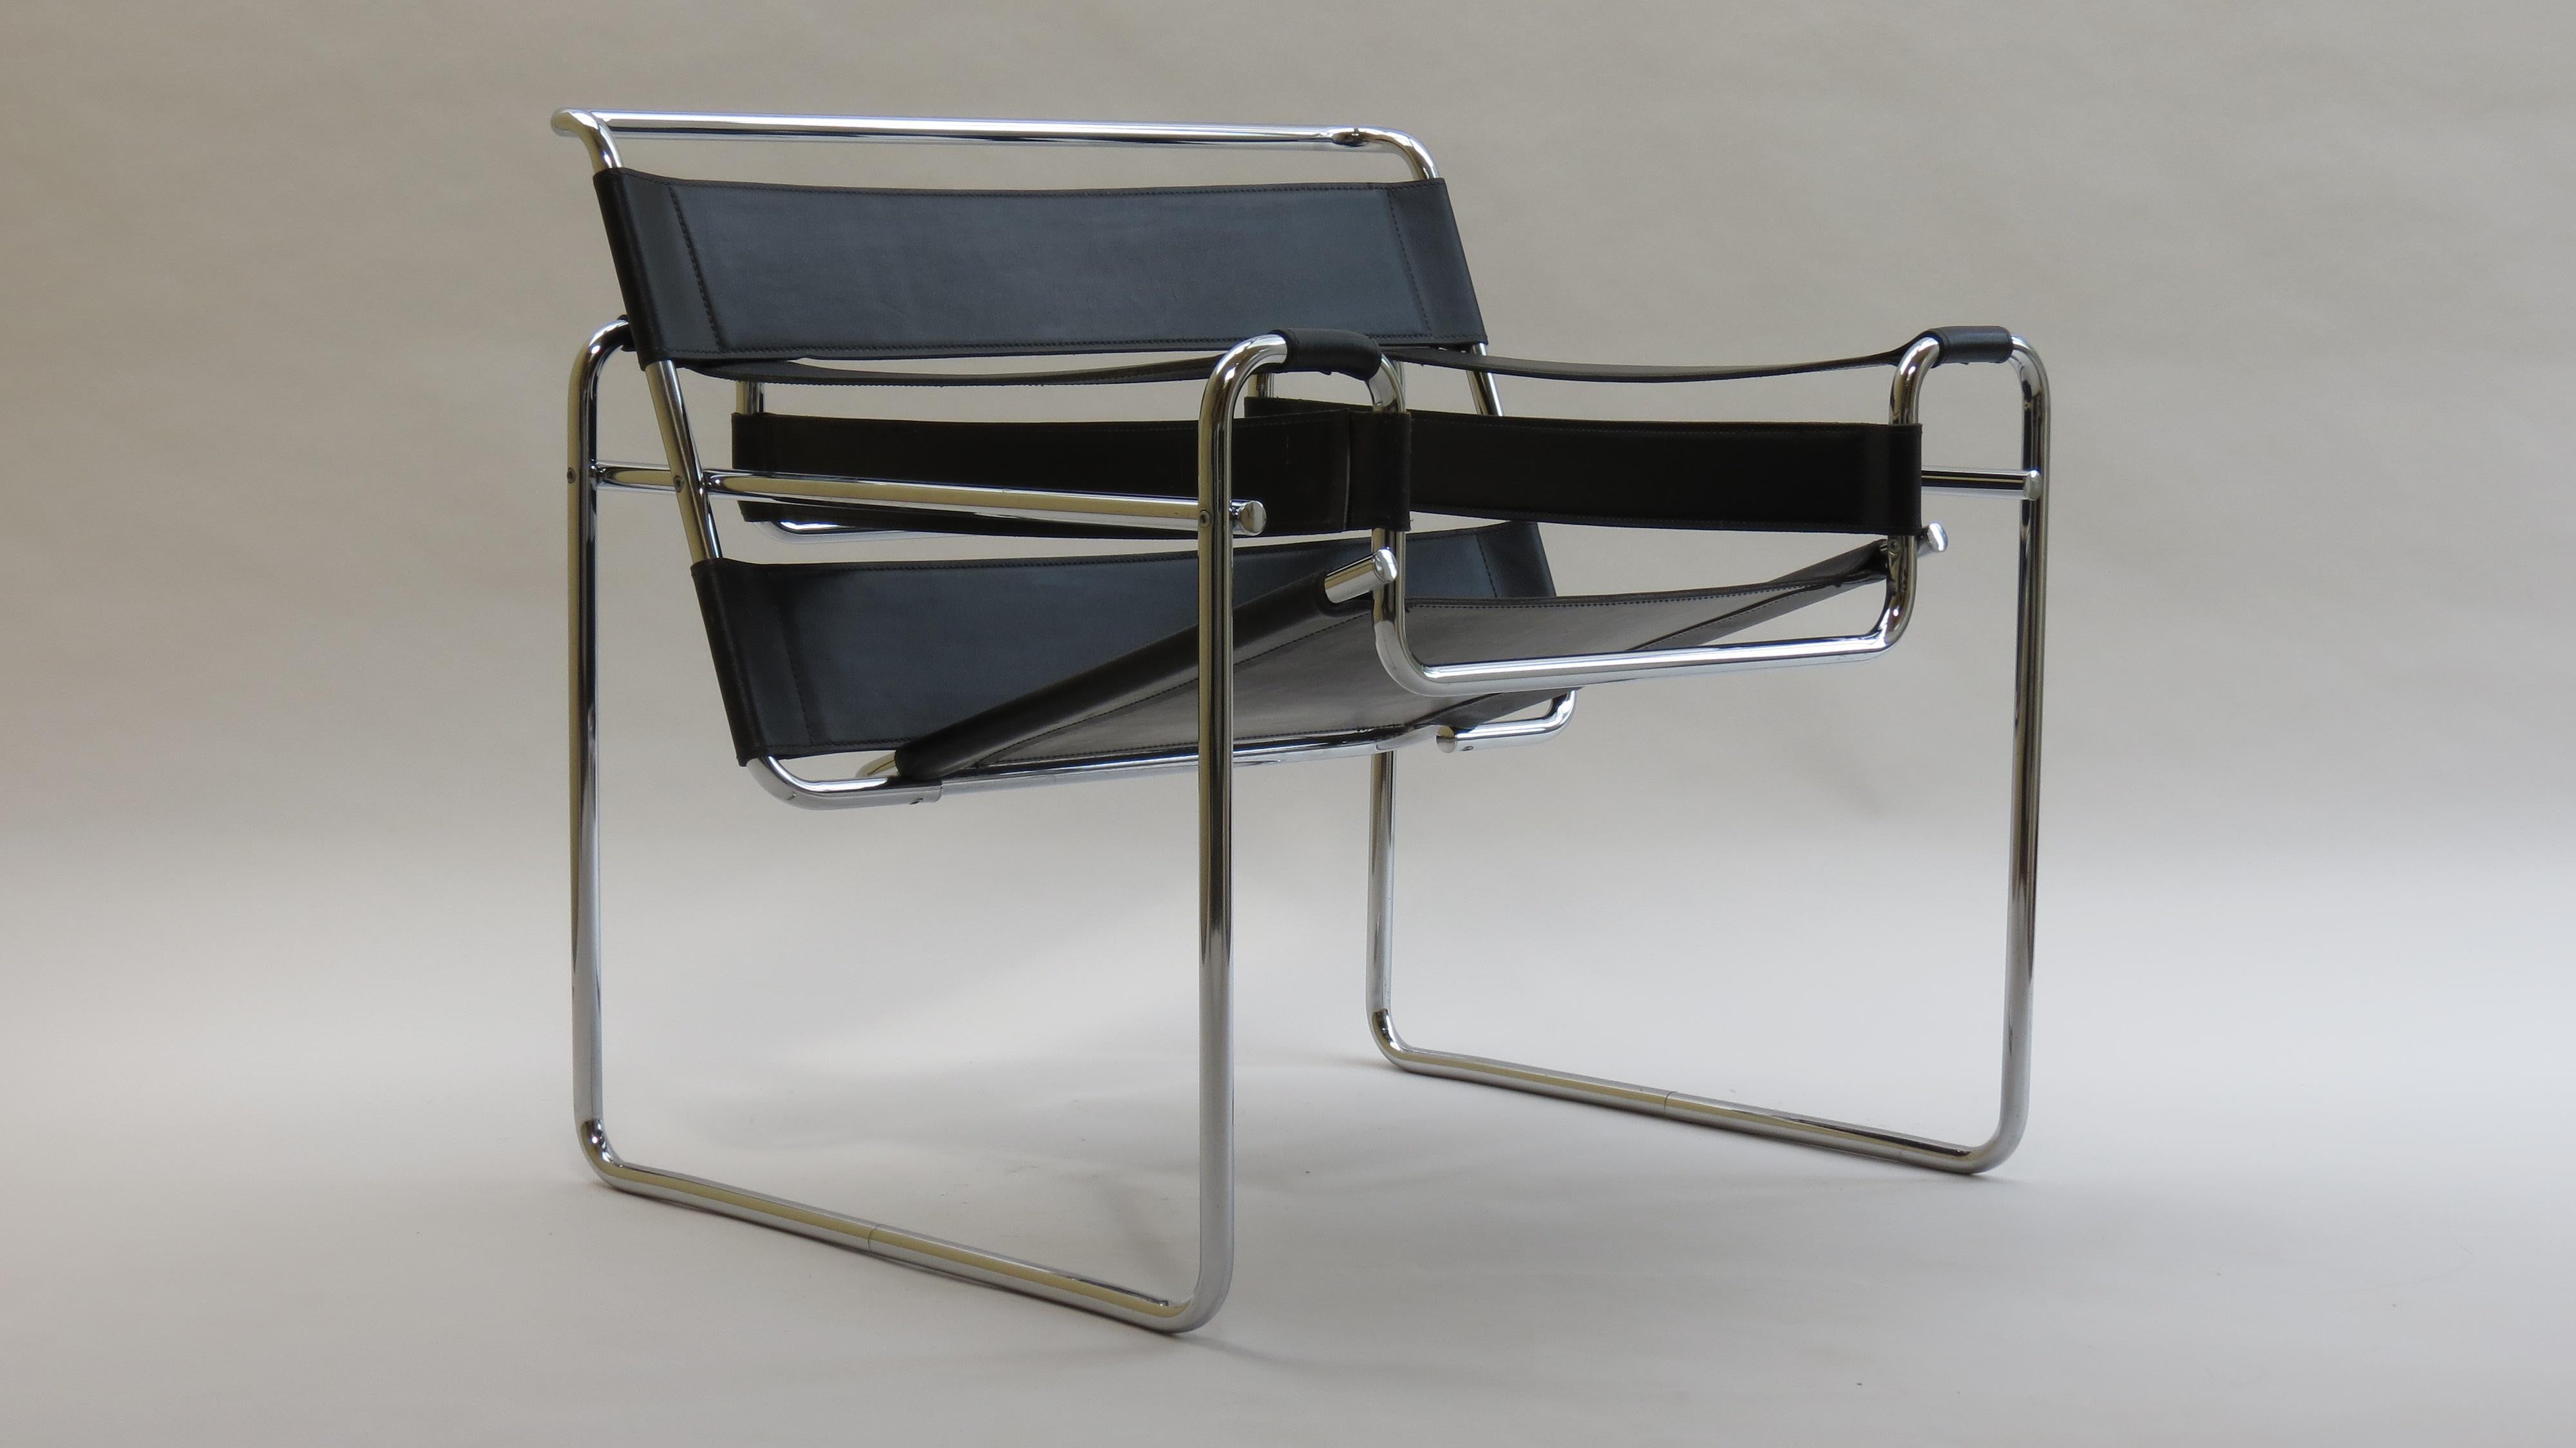 Wassily chair designed by Marcel Breuer. The original year of design of this chair was 1925, this particular chair was manufactured in the early 1980s.

A very nice vintage Wassily chair manufactured in the 1980s. Unknown manufacturer. Very good